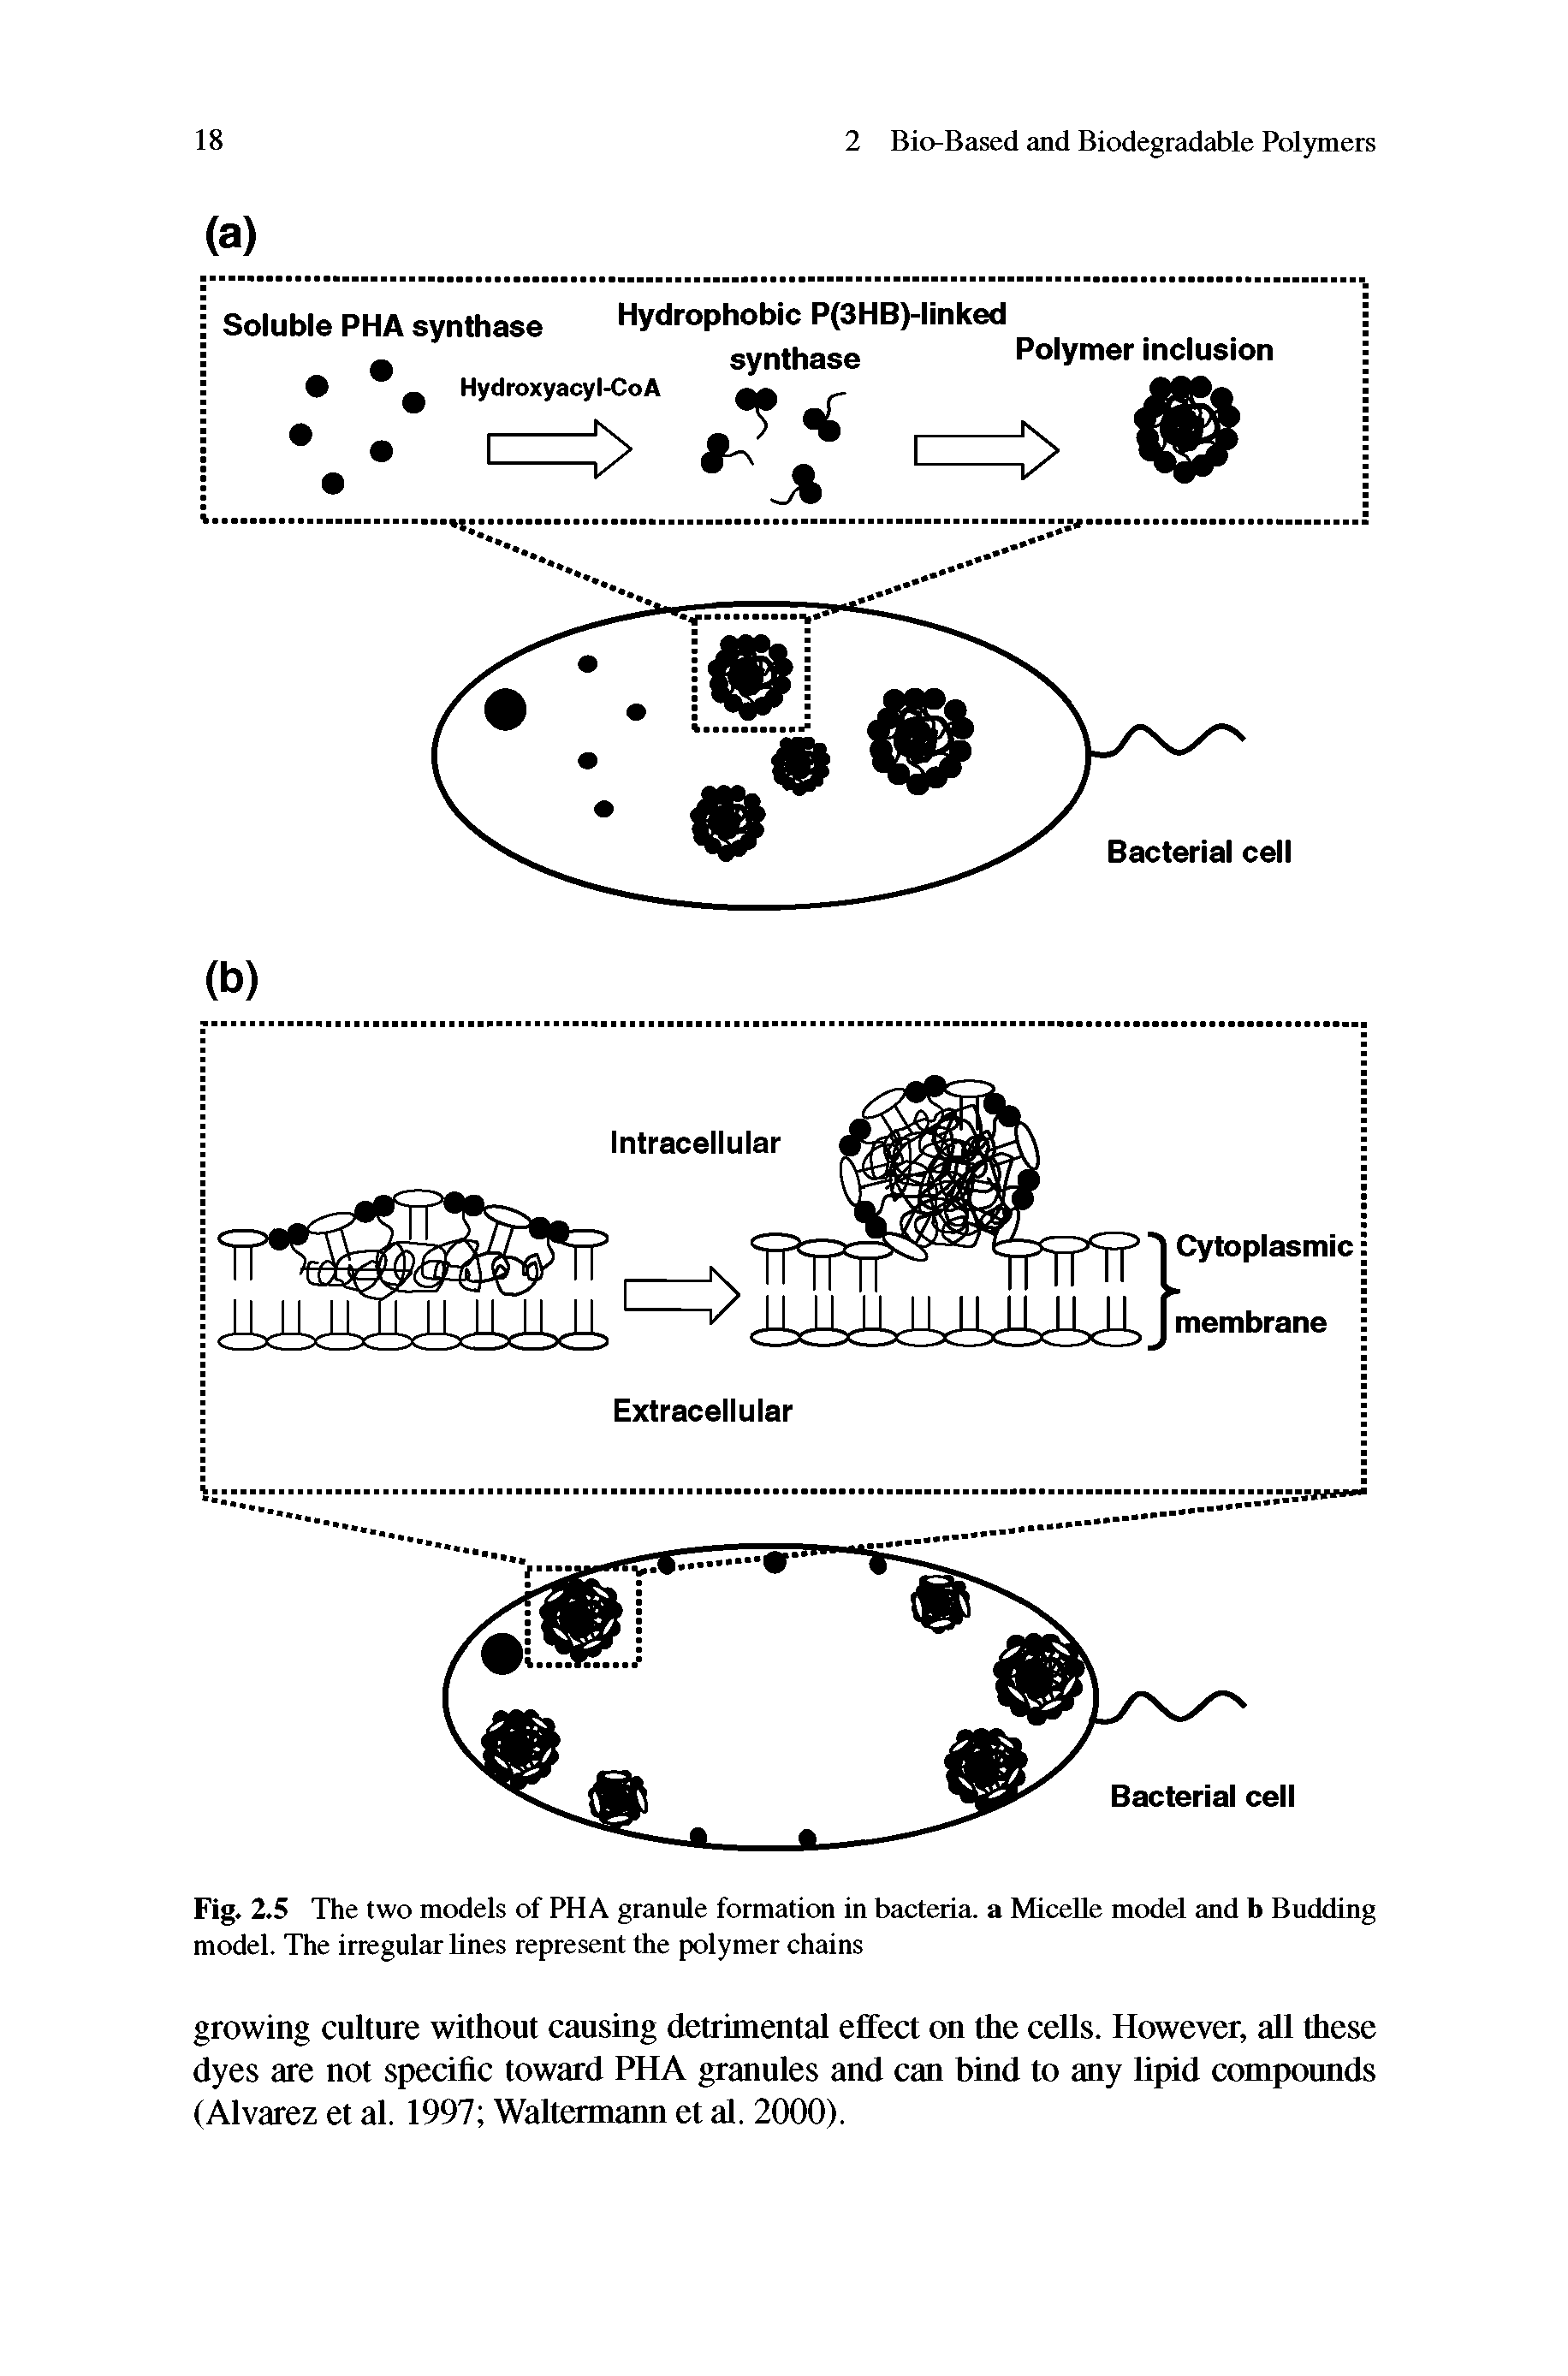 Fig. 2.5 The two models of PHA granule formation in bacteria, a Micelle model and b Budding model. The irregular lines represent the polymer chains...